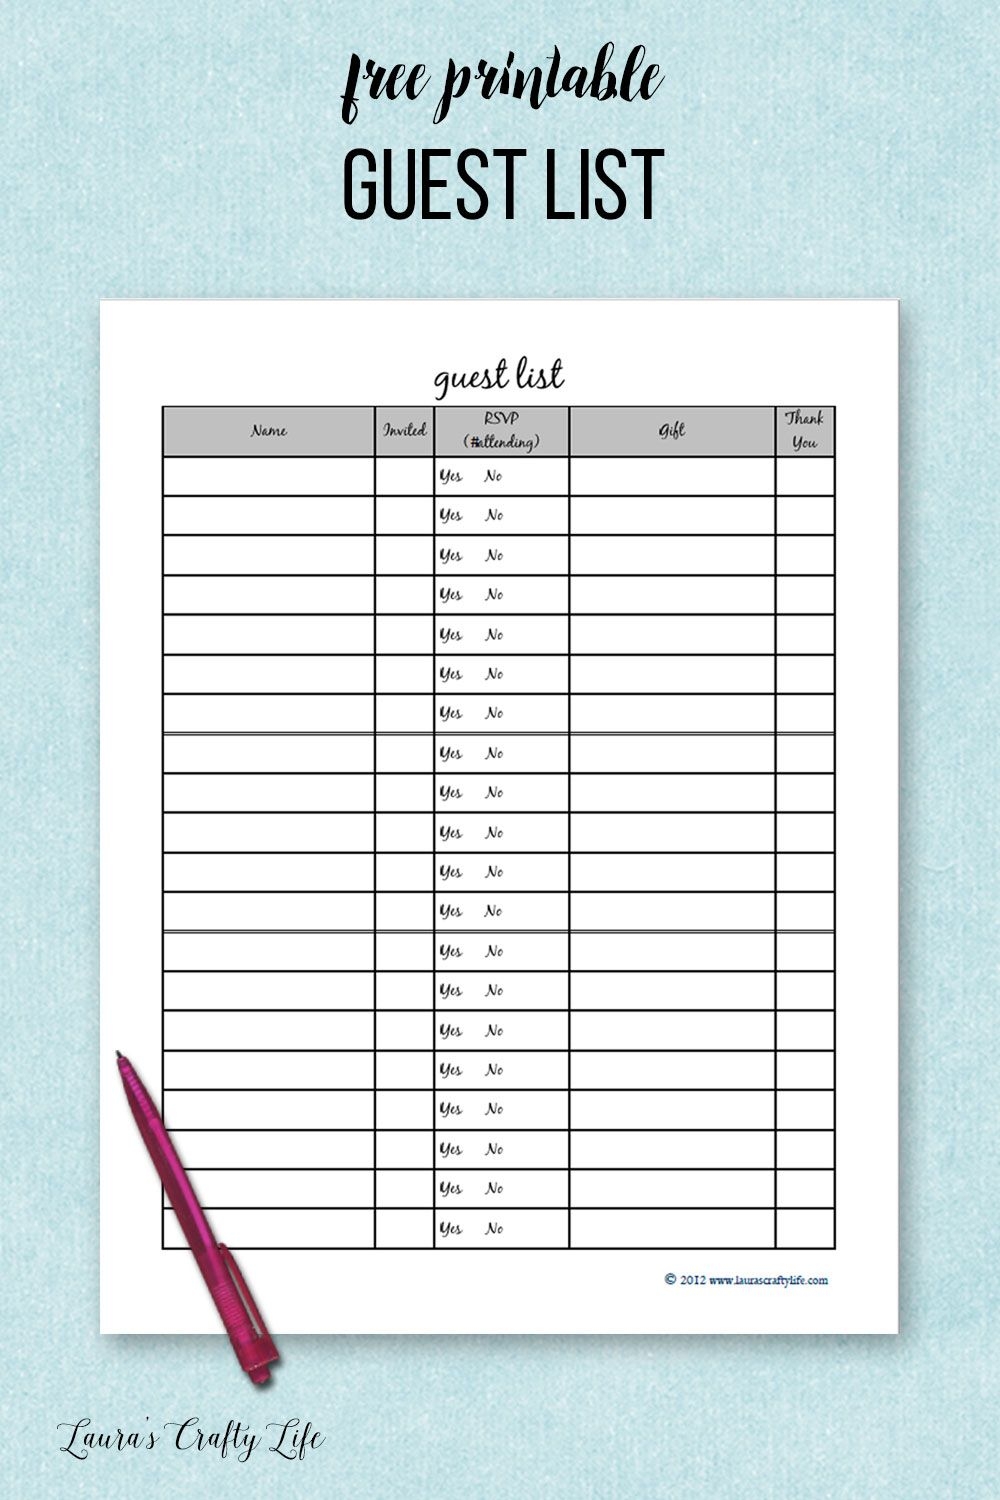 Party Planner Printable Wedding Guest List Template Guest List Template Party Planning Checklist - Free Printable Birthday Guest List